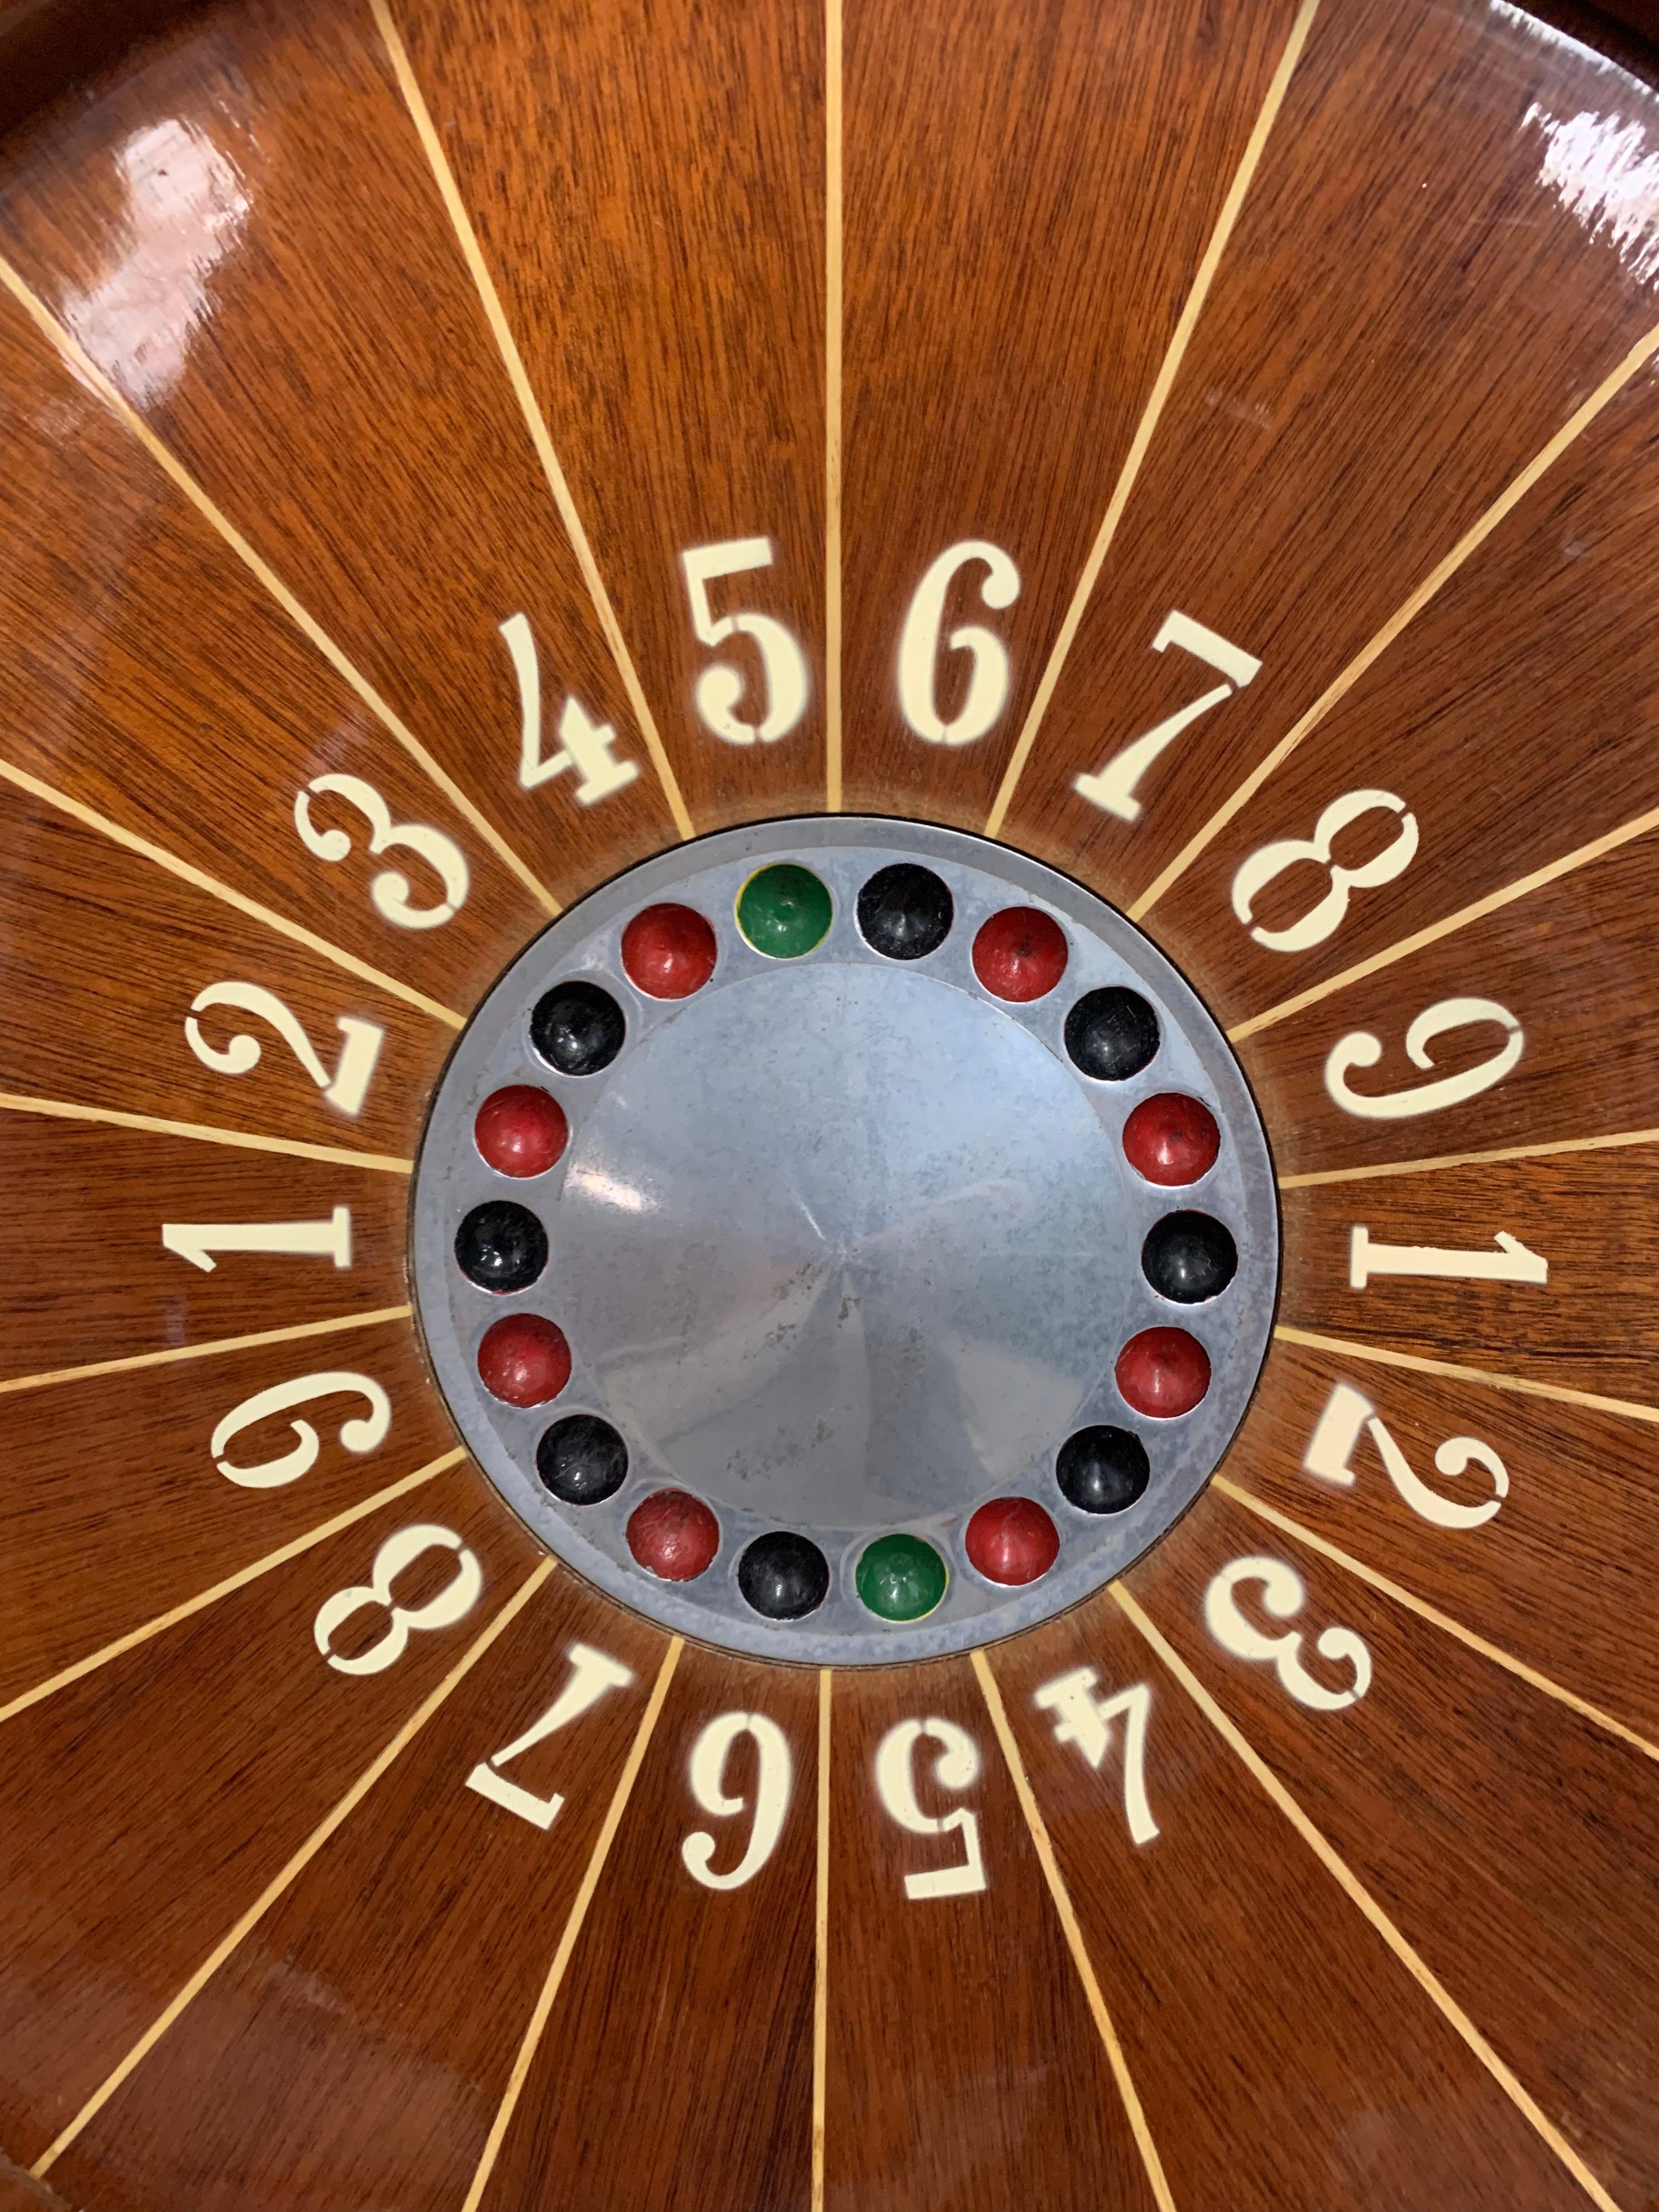 La Boule is a typical French casino game and was also known as 'simple roulette'. Was used frequently in the casinos, however, due to the winning opportunities that were especially good for the casinos ?? it is now a game that you no longer